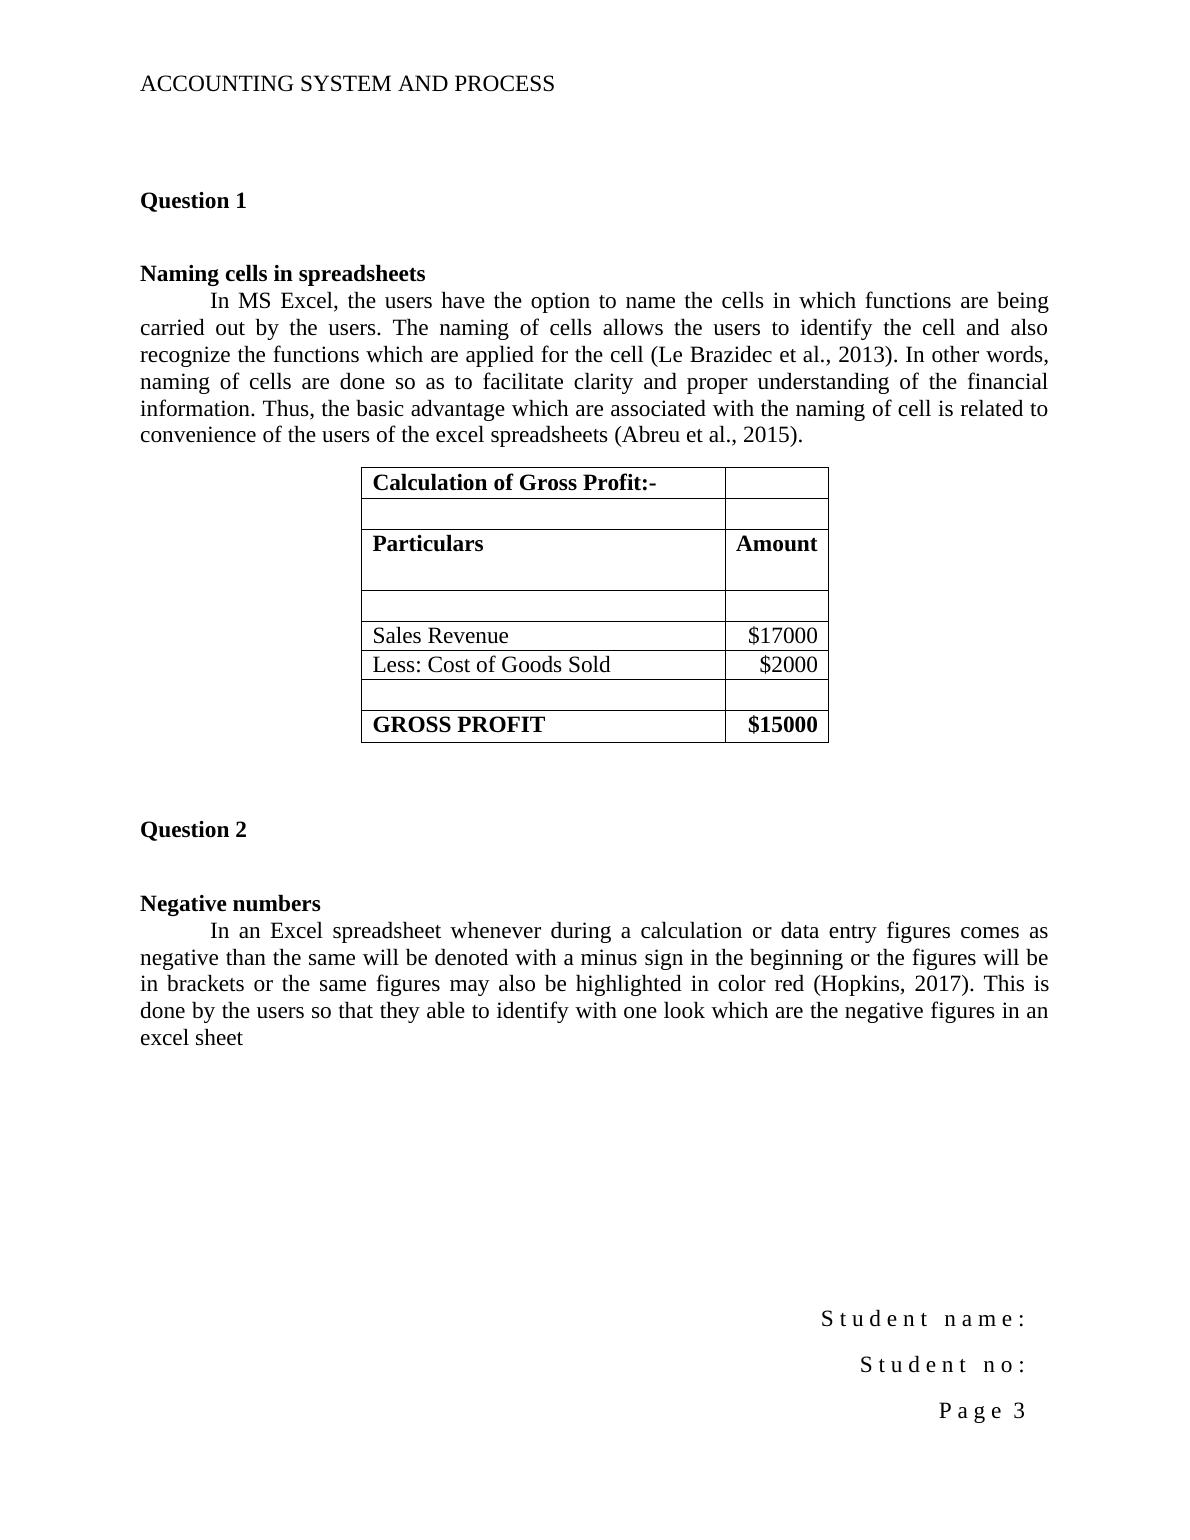 Accounting Systems and Processes  - Sample   Assignment_3